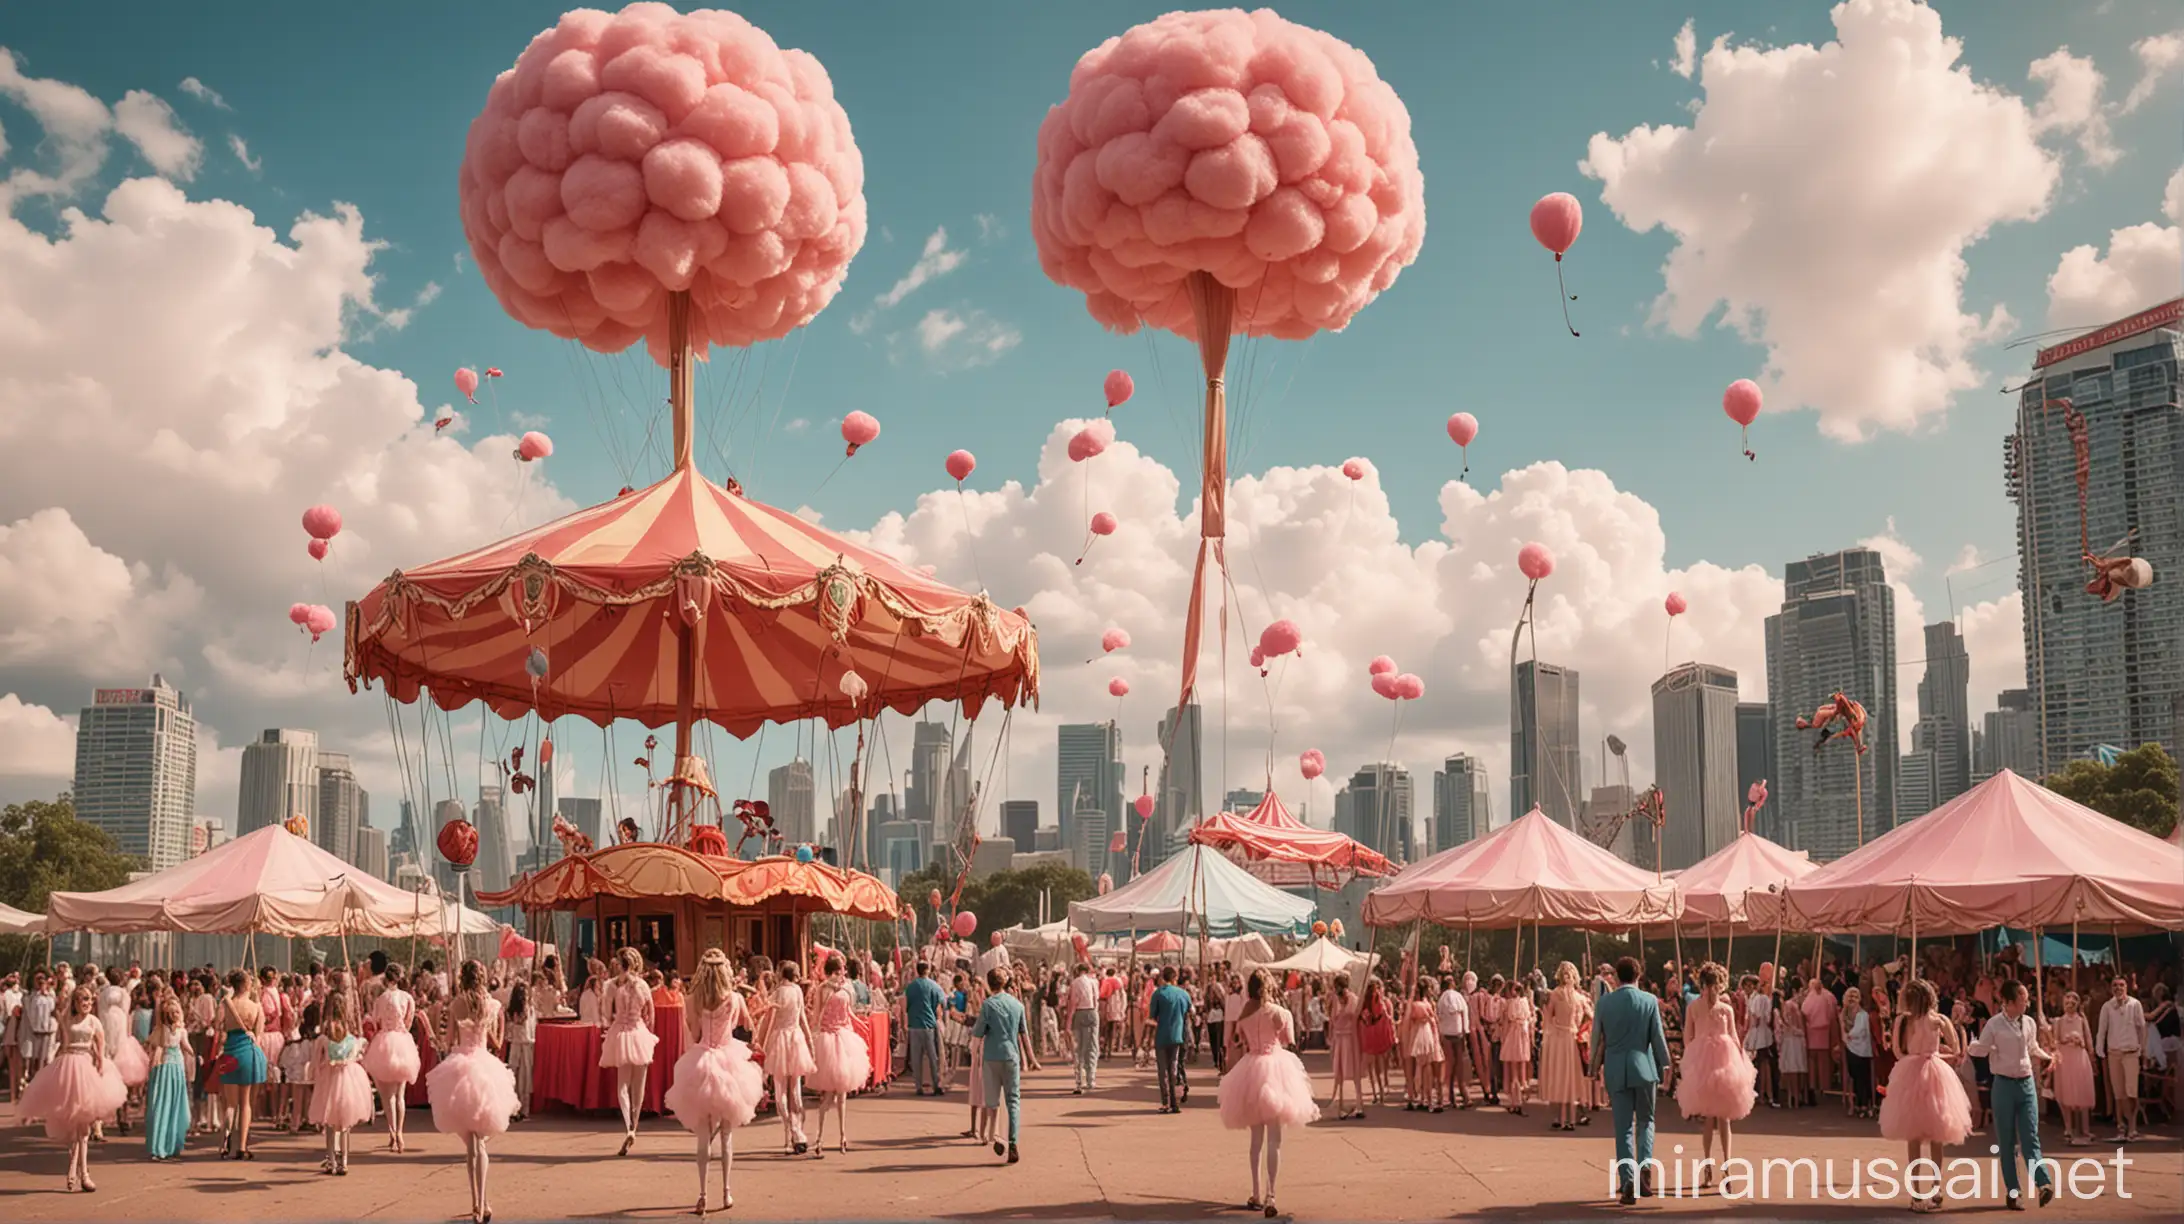 circus tent, flamingos, stilt walkers, children eating cotton candy, airship in the sky, skyscrapers in the background


